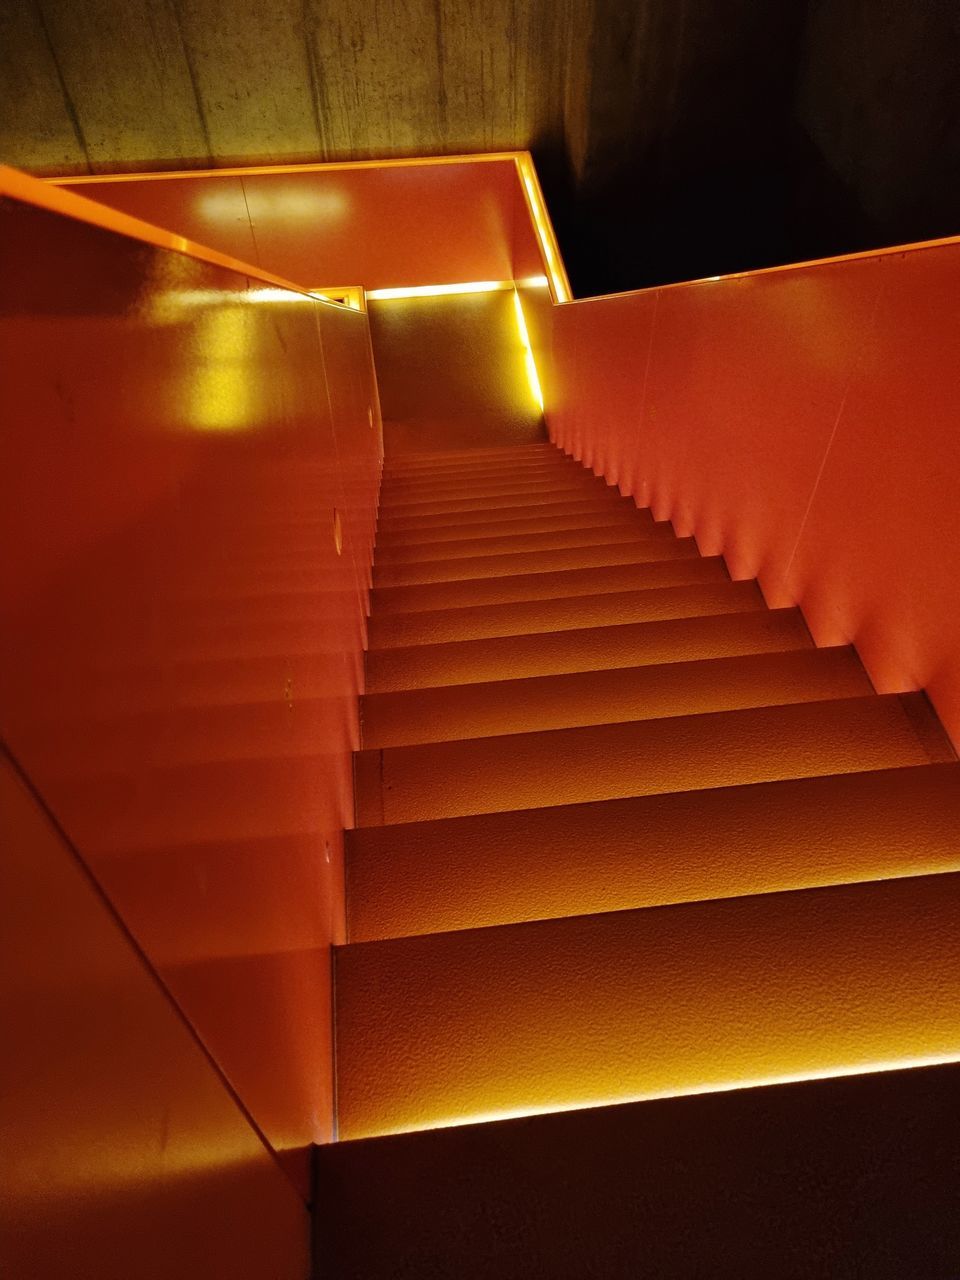 yellow, light, red, staircase, steps and staircases, orange, architecture, indoors, stairs, no people, illuminated, line, night, ceiling, pattern, built structure, orange color, lighting, lighting equipment, wall - building feature